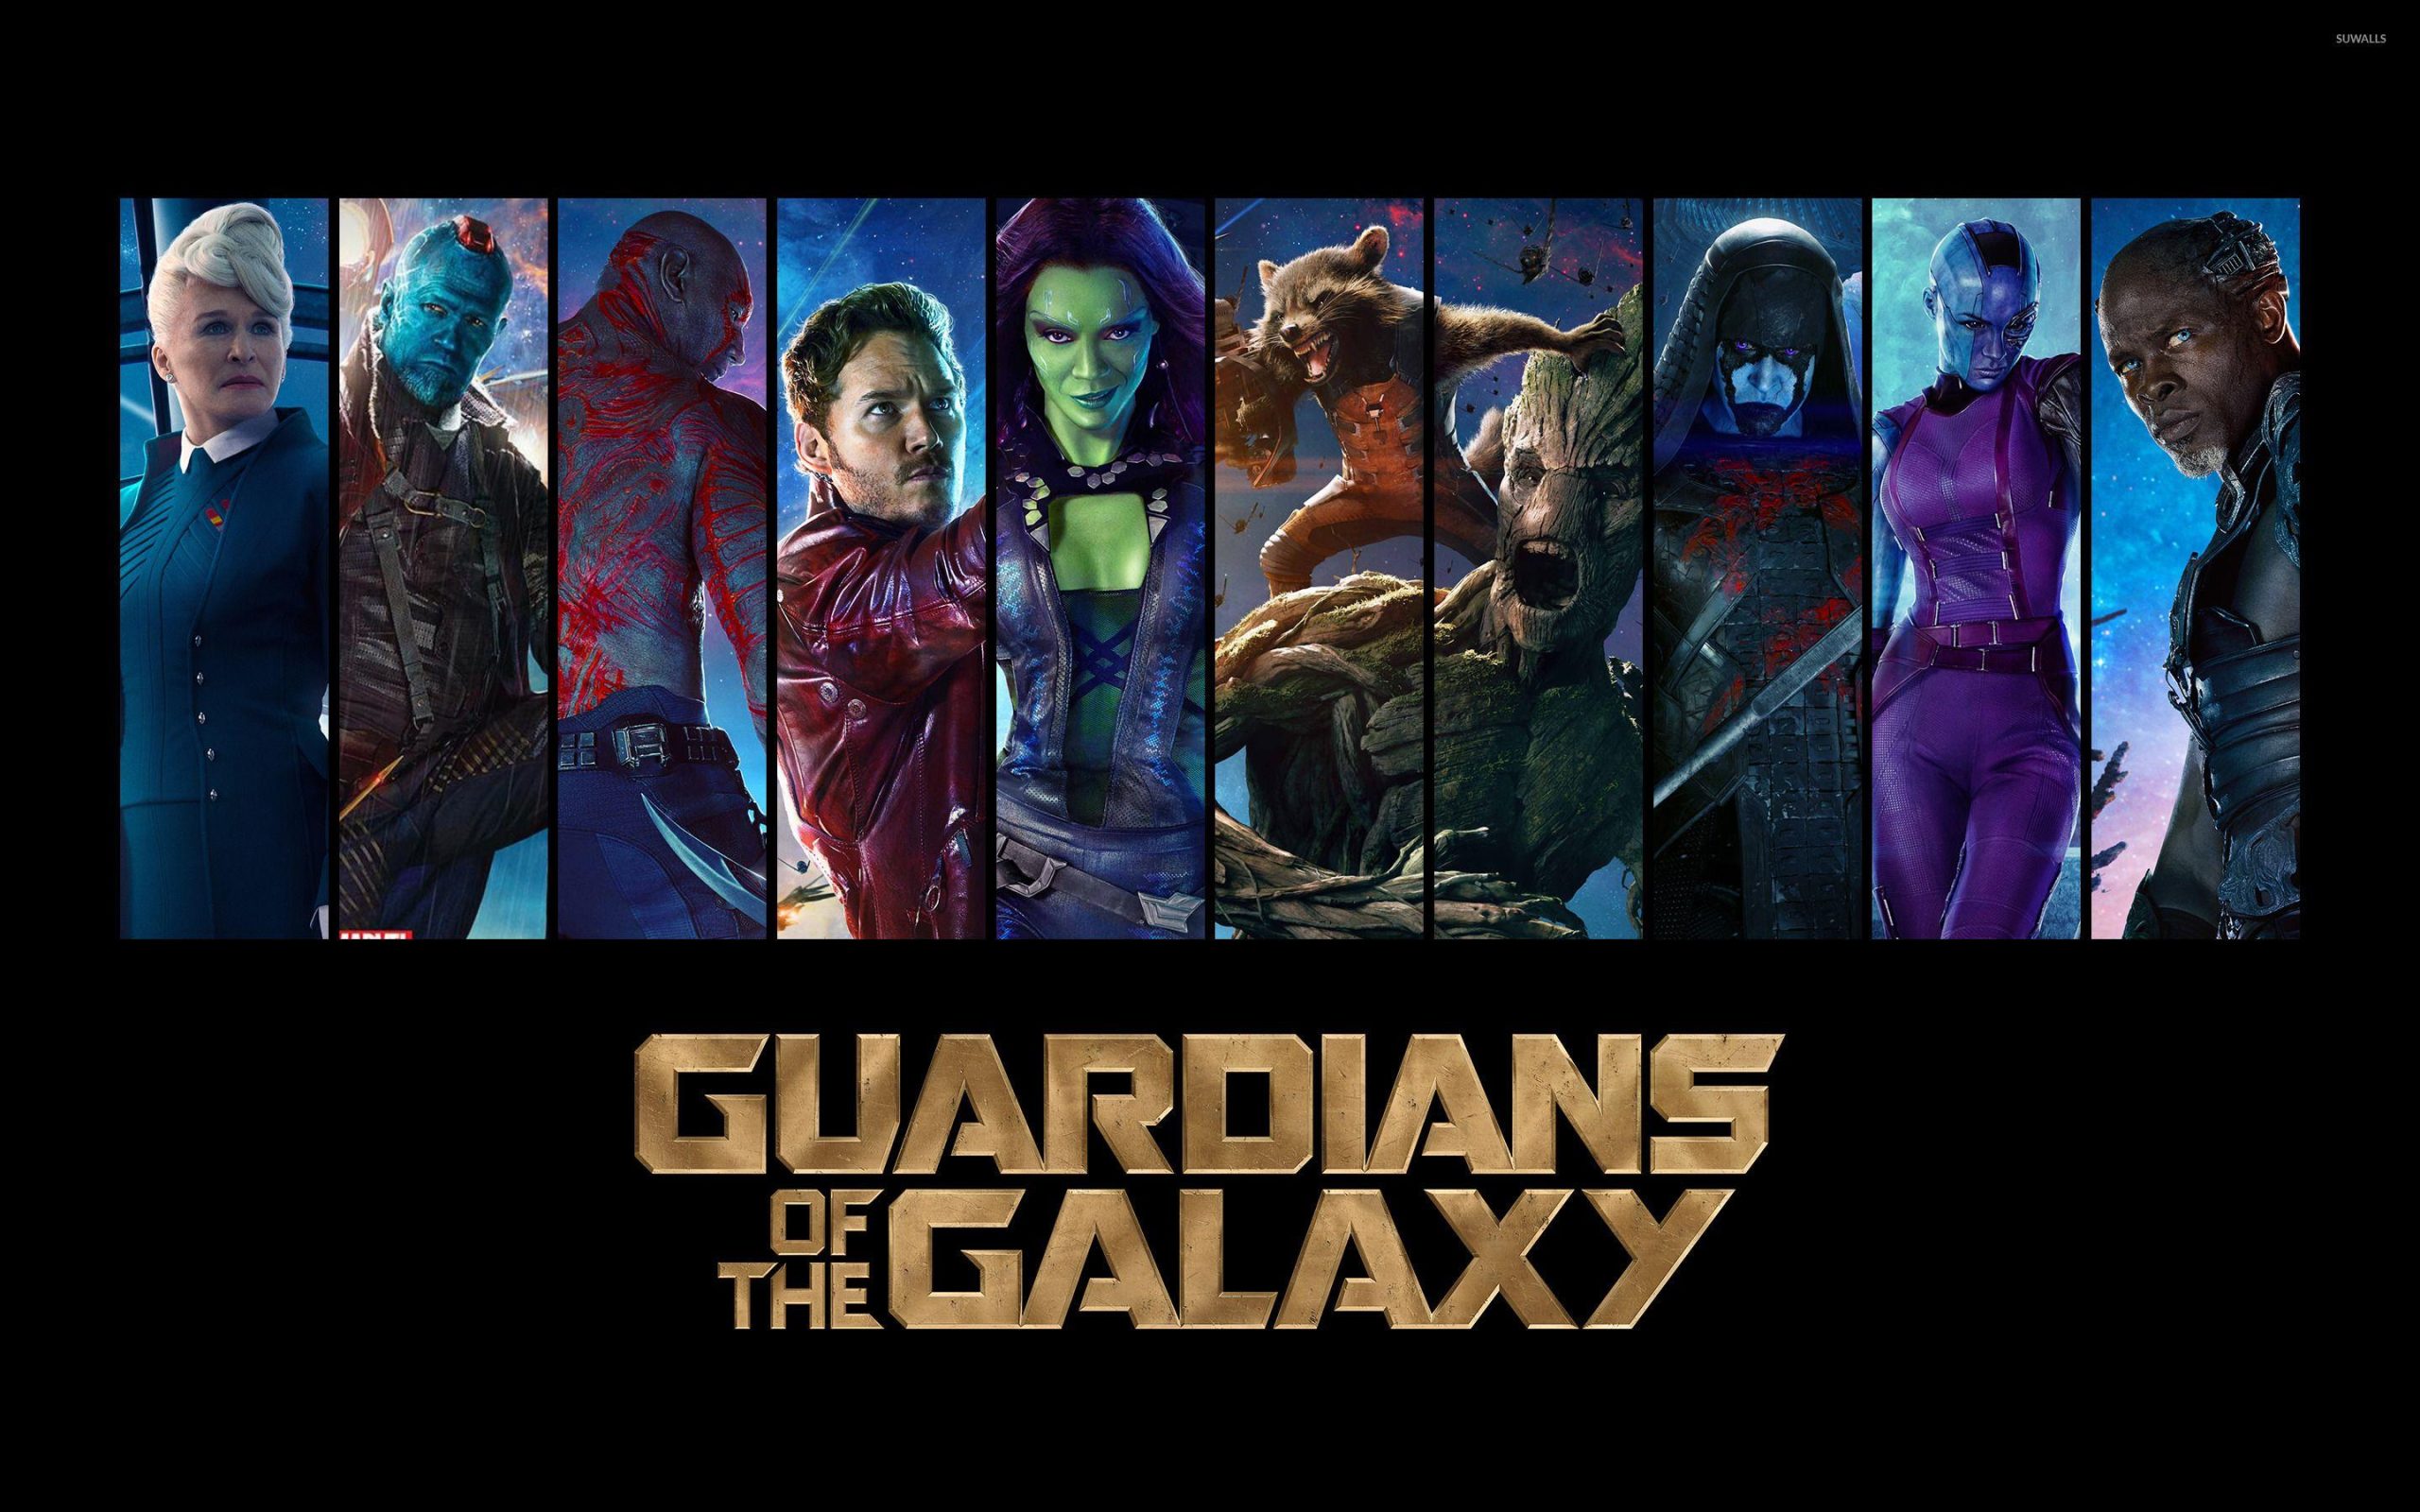 The Guardians Of The Galaxy 4k Laptop Wallpaper 4k, The Guardians Of The Galaxy 4k, Movies